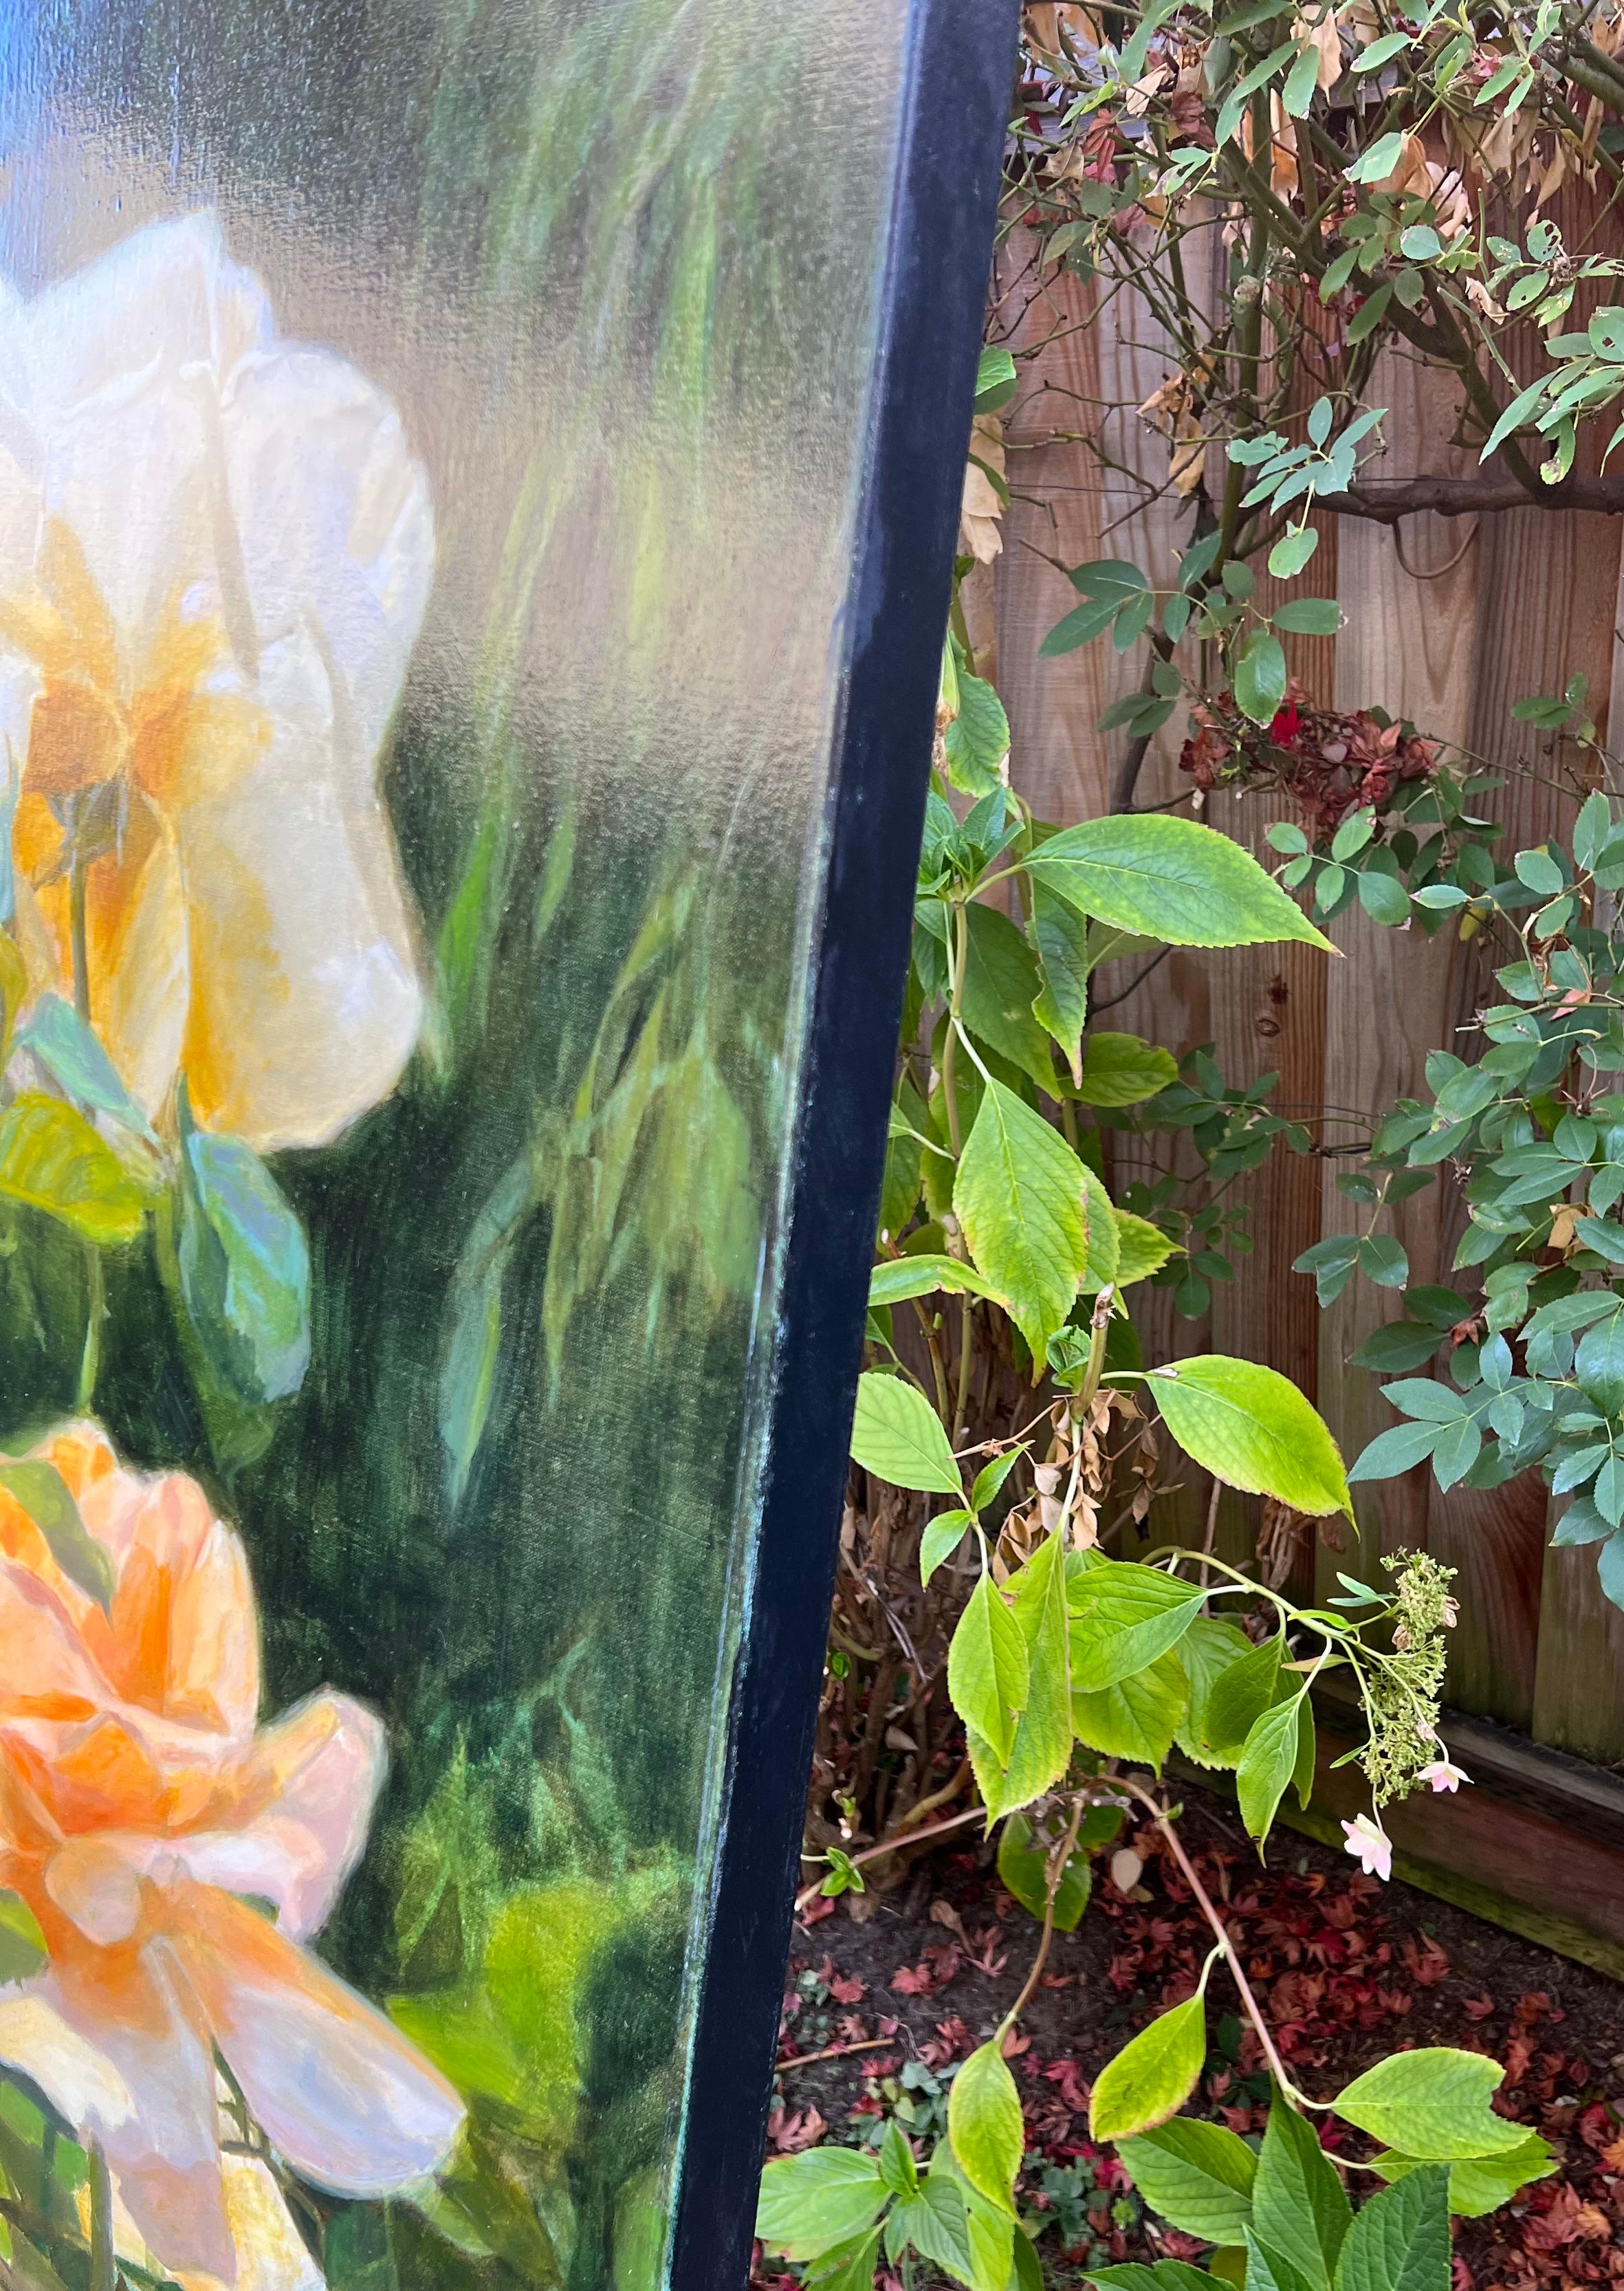 <p>Artist Comments<br>The white roses absorb the golden sunlight, casting a yellow and peachy hue across their petals. Surrounding leaves form a lush backdrop, adding to the vintage charm of the flowers. This painting stands as a testament to the